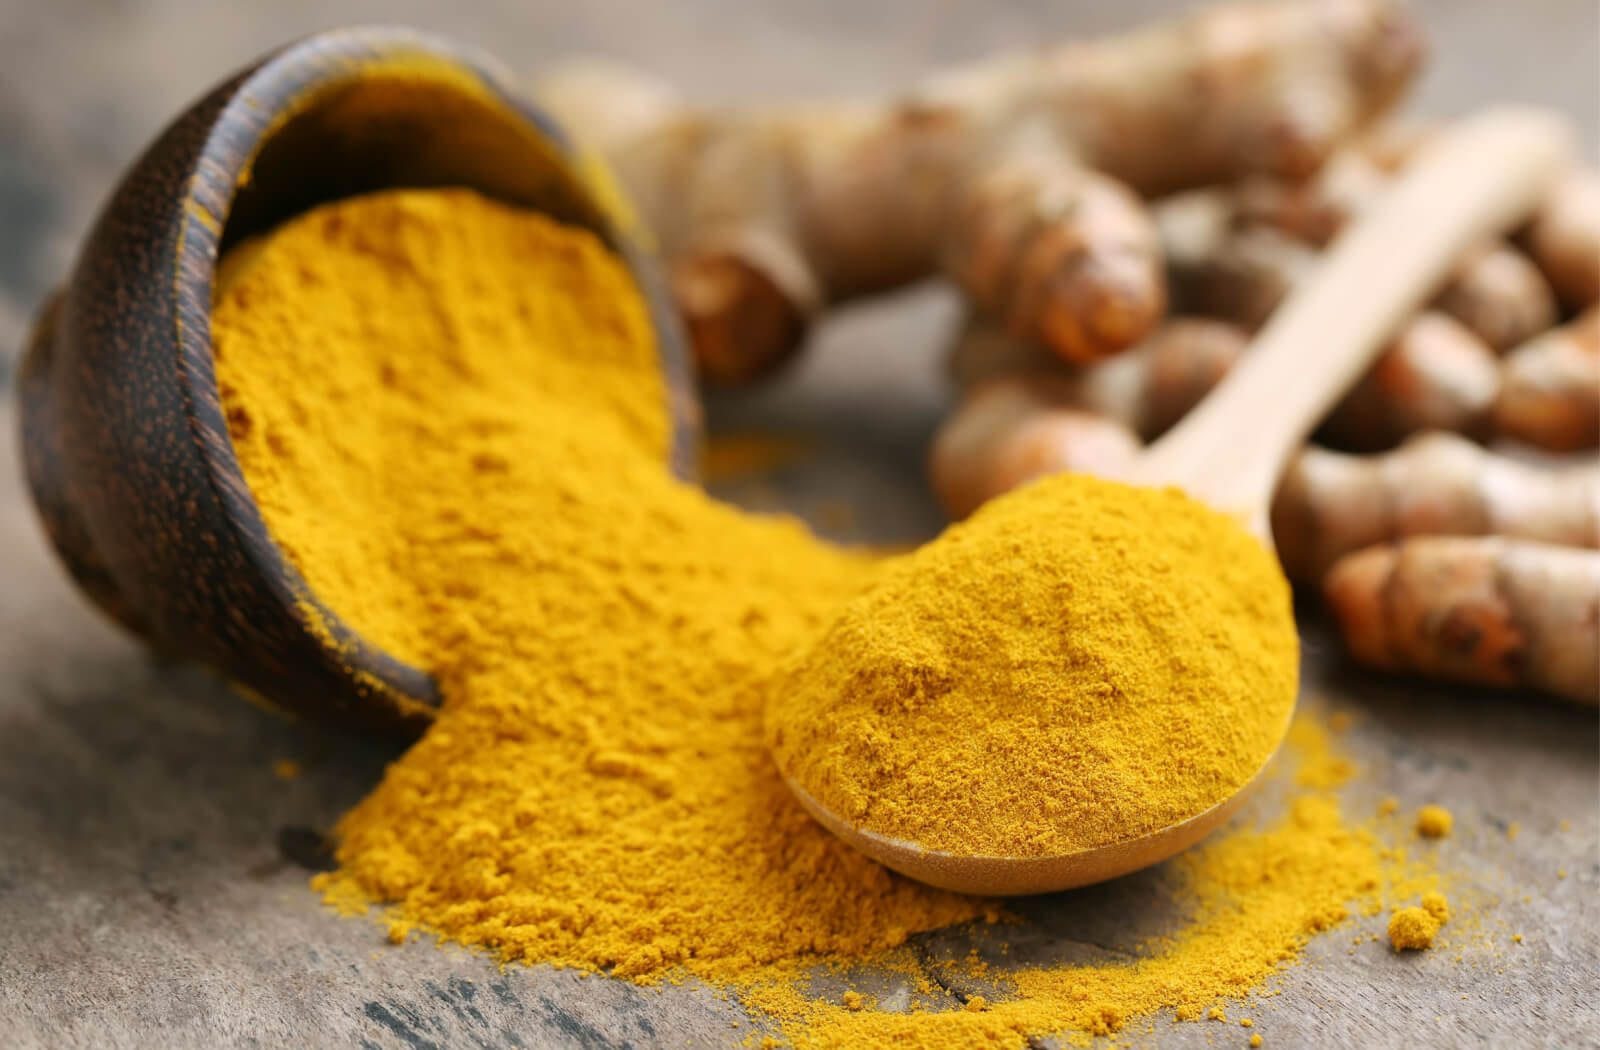 A close-up of a spoonful of turmeric powder beside a bowl of it and turmeric.